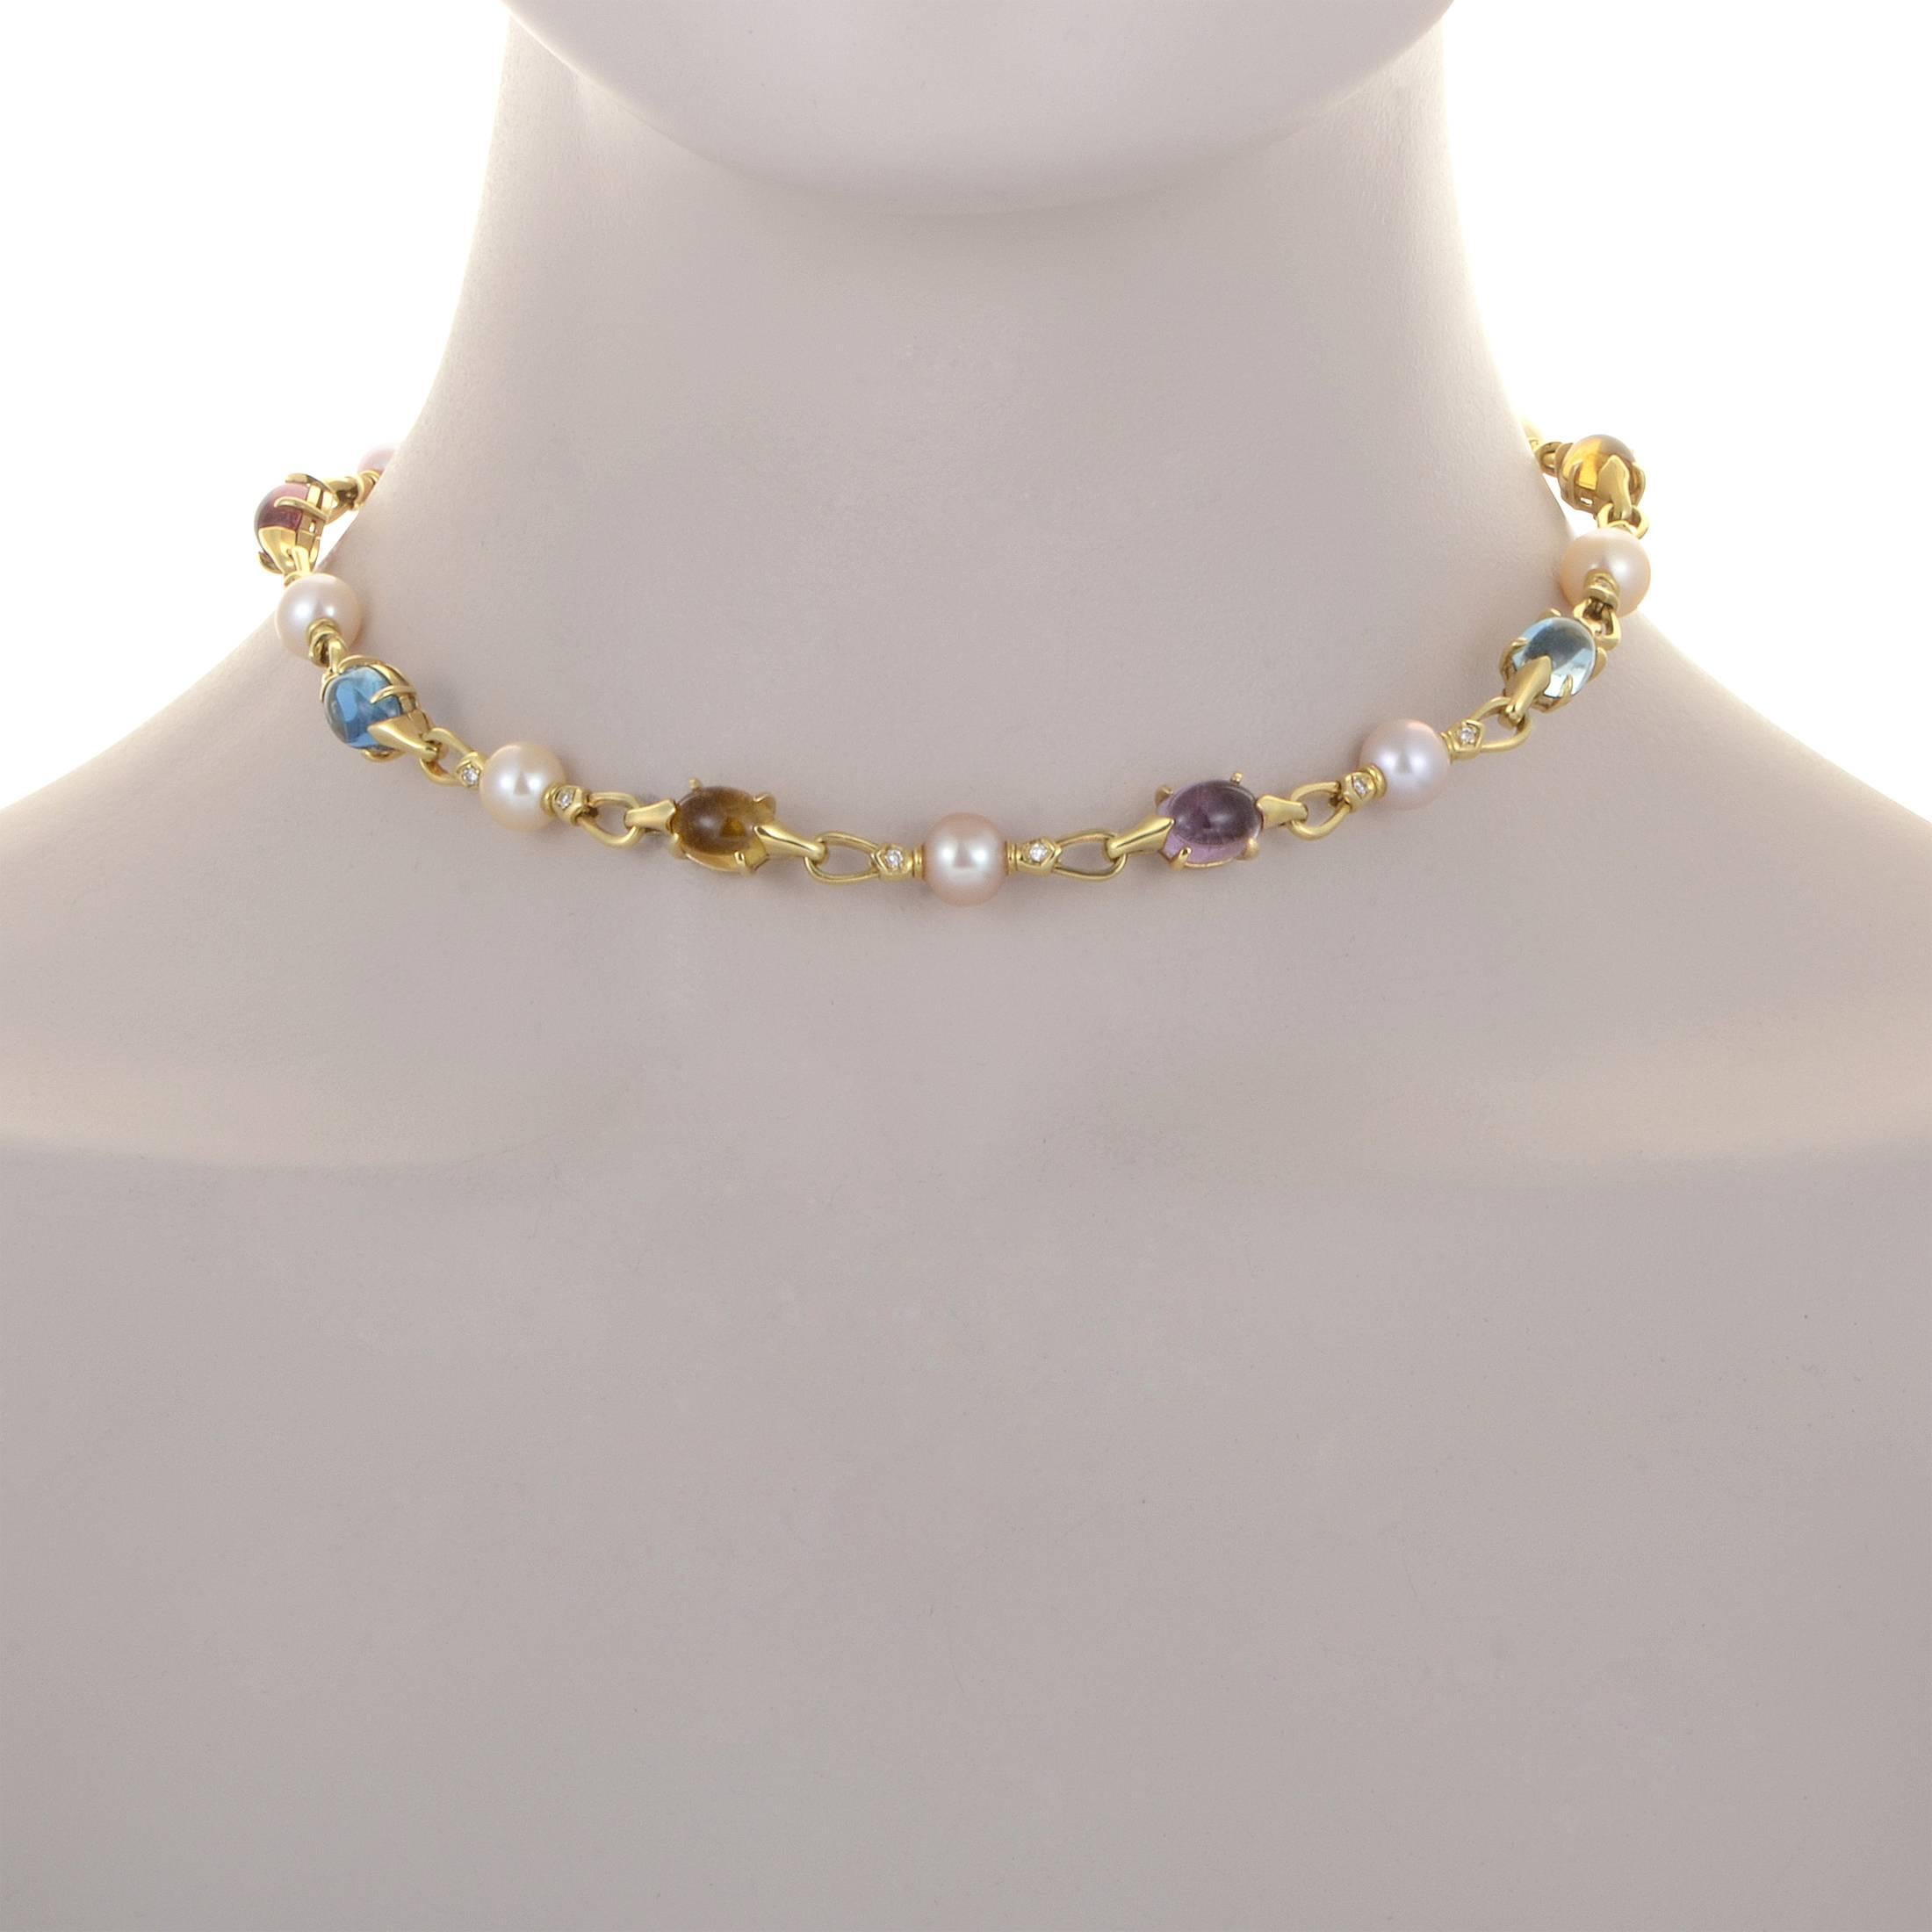 Lined along the radiant 18K yellow gold chain and producing a lively and charming sight, the resplendent diamonds, delightful pearls and joyful multicolored gems grace this gorgeous necklace from Bulgari with irresistible allure.
Included Items: